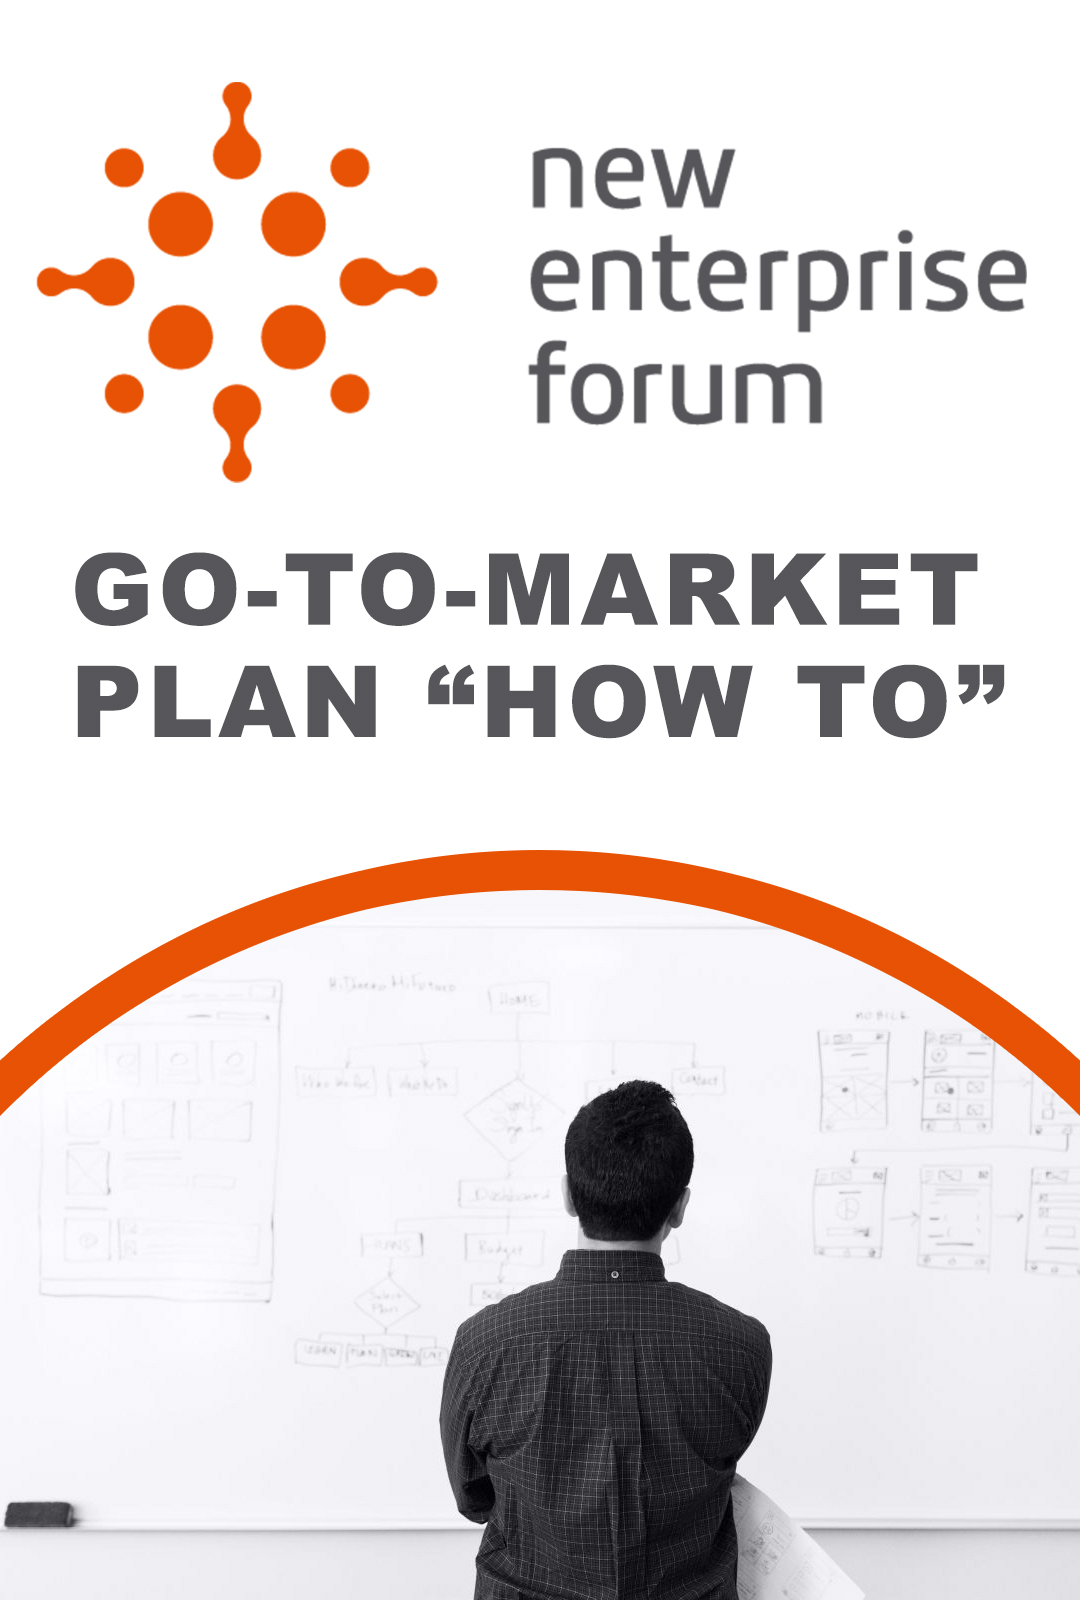 Go-to-Market Plan “How To”